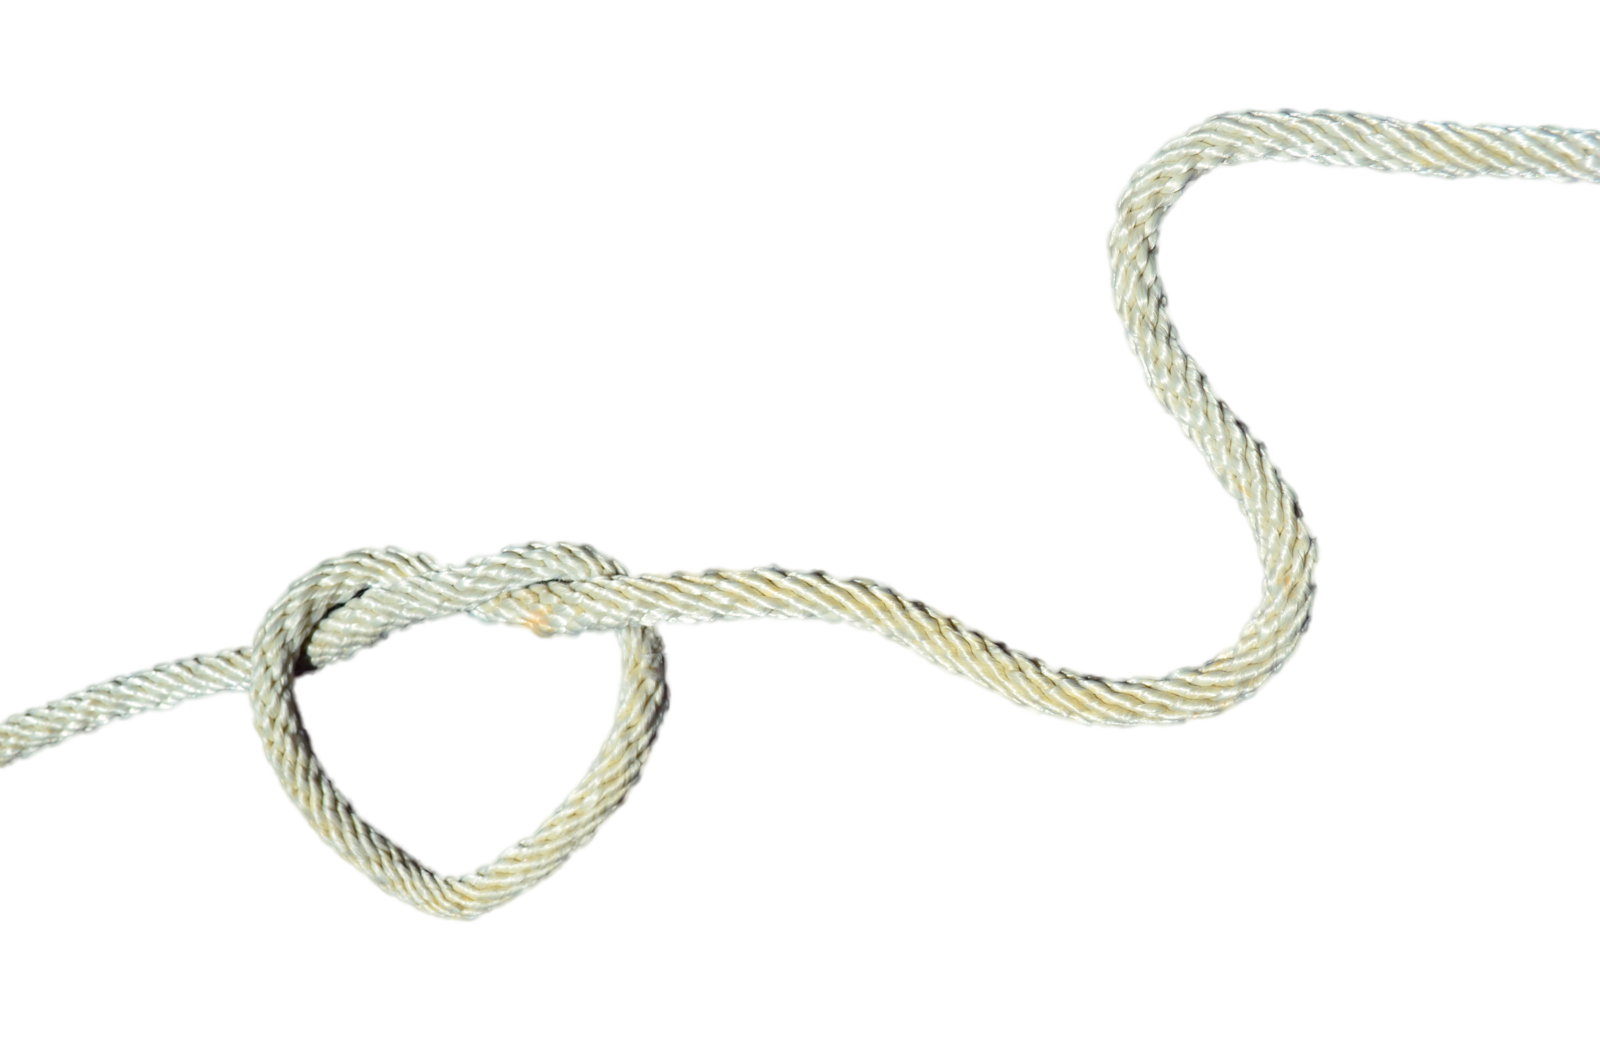 Rope Png - Rope, Transparent background PNG HD thumbnail